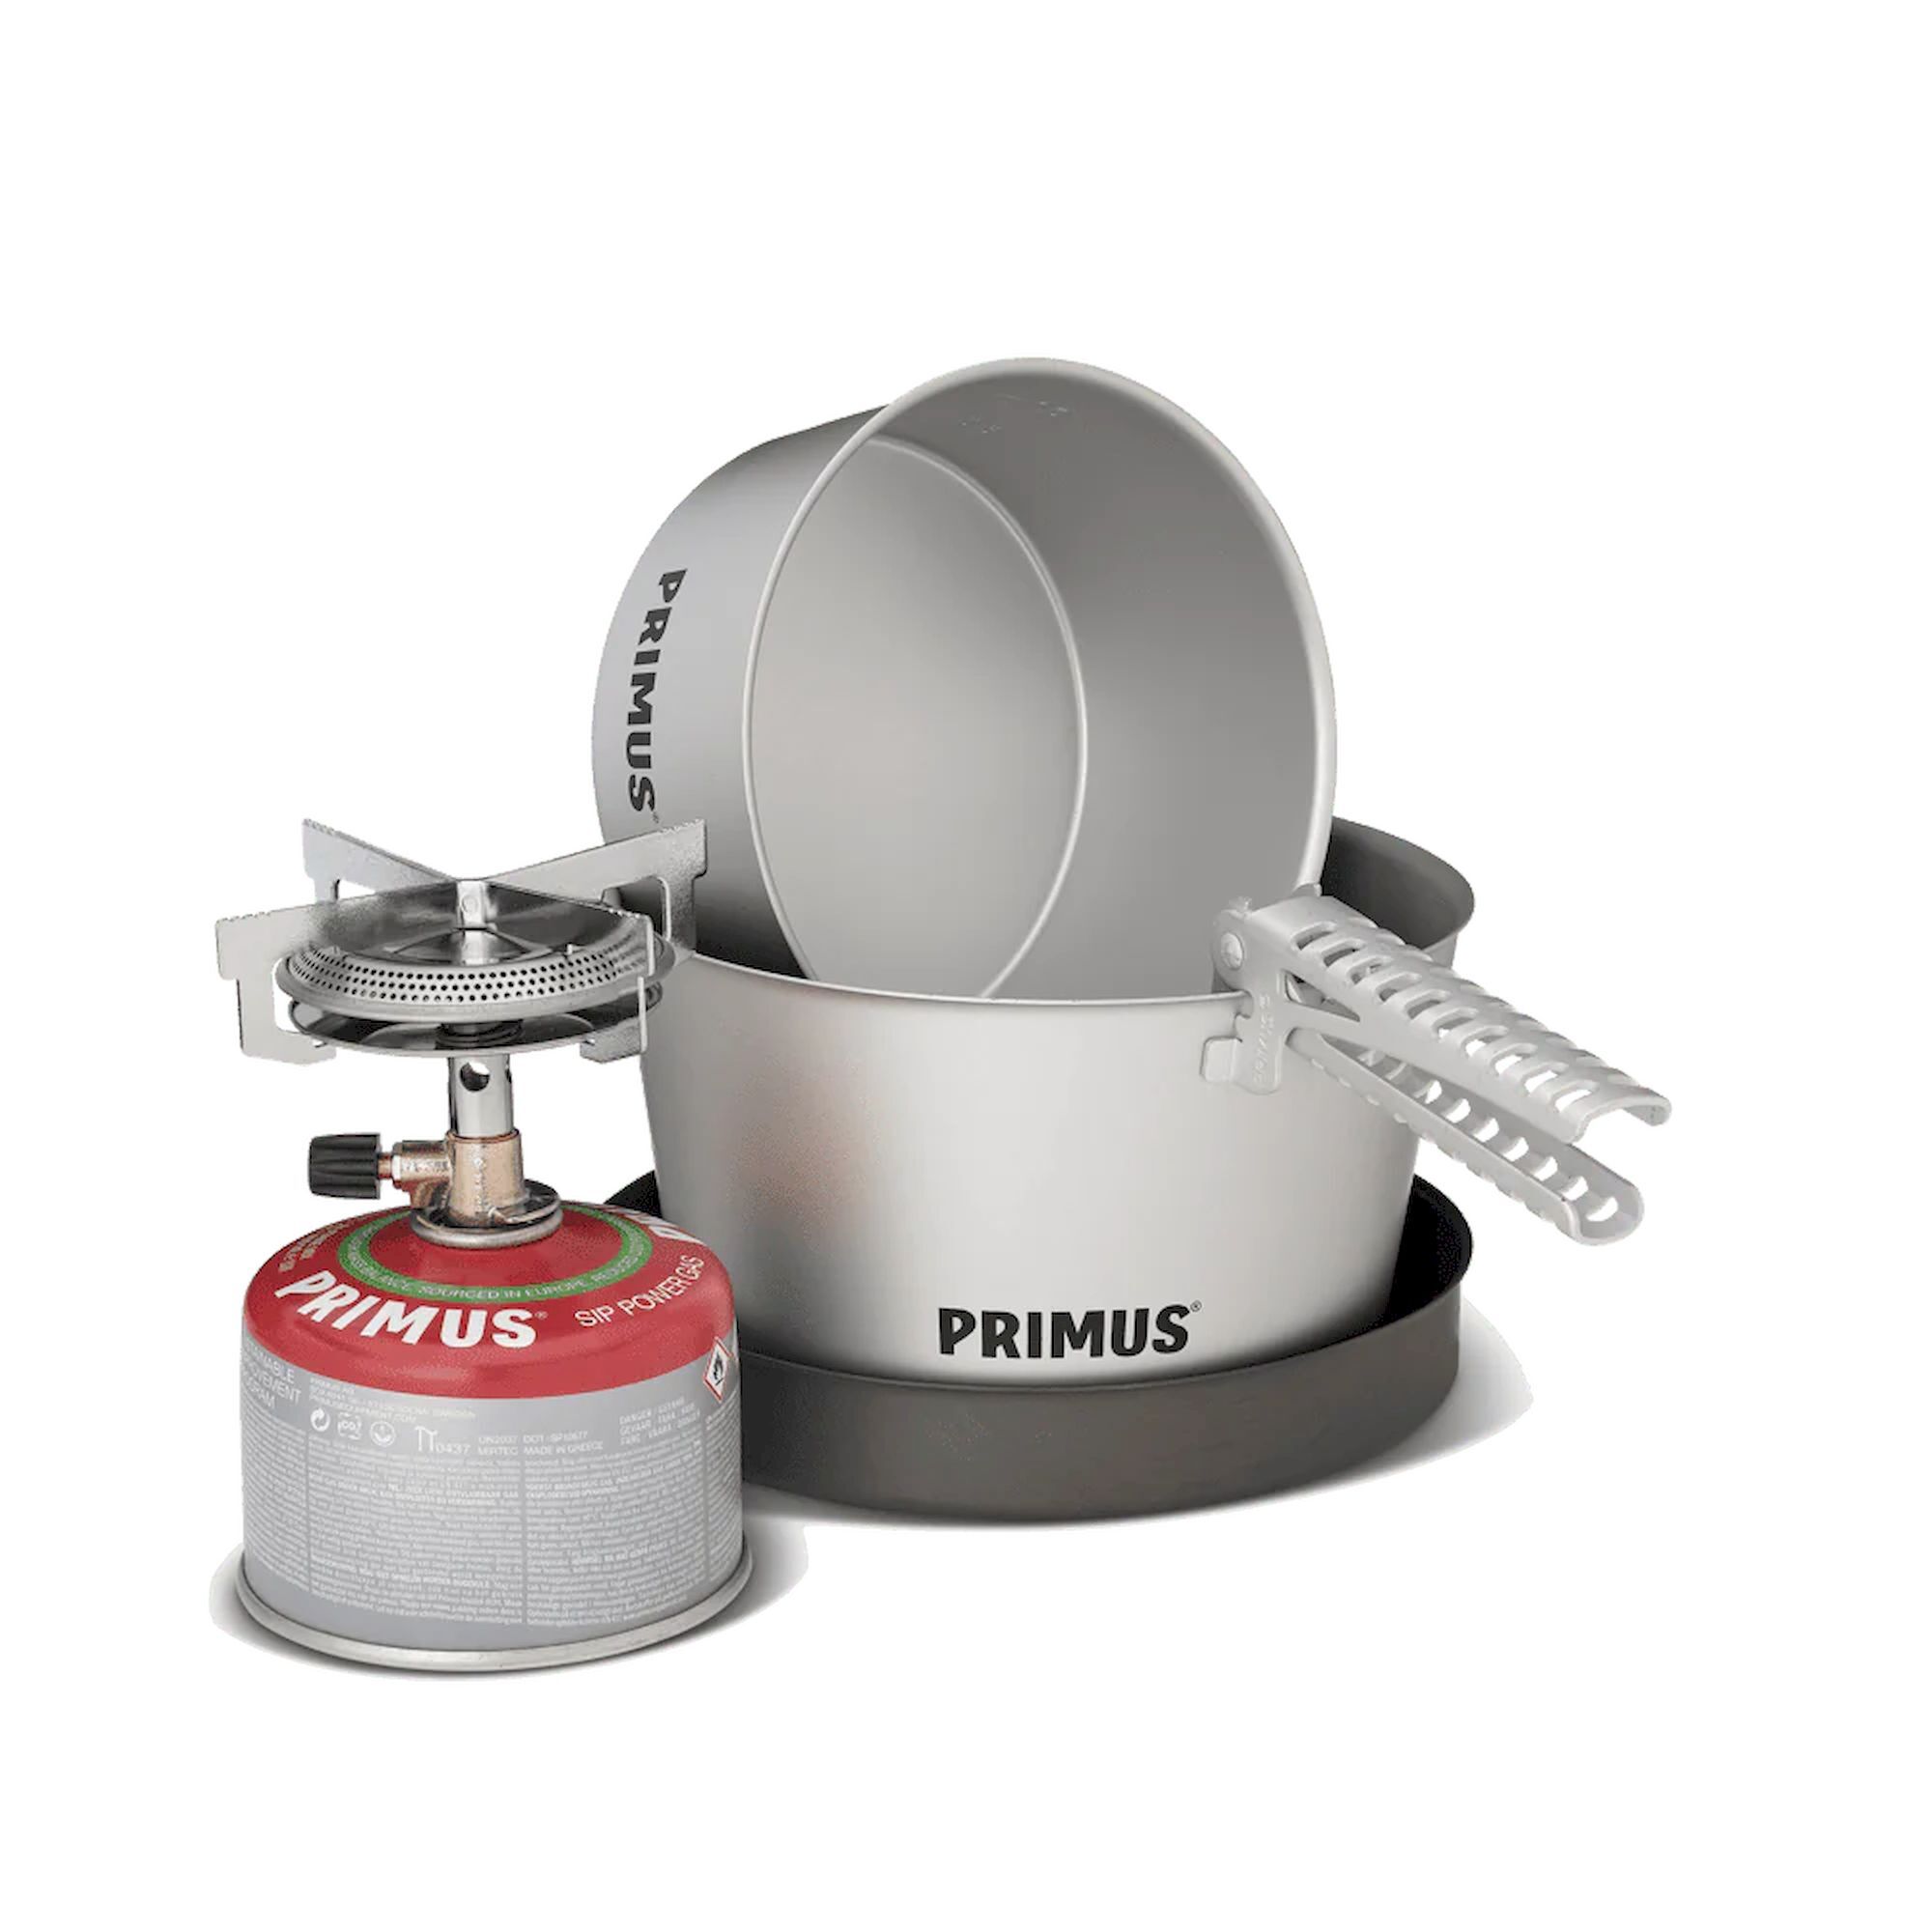 Primus Mimer Stove Kit II - Fornello a gas | Hardloop